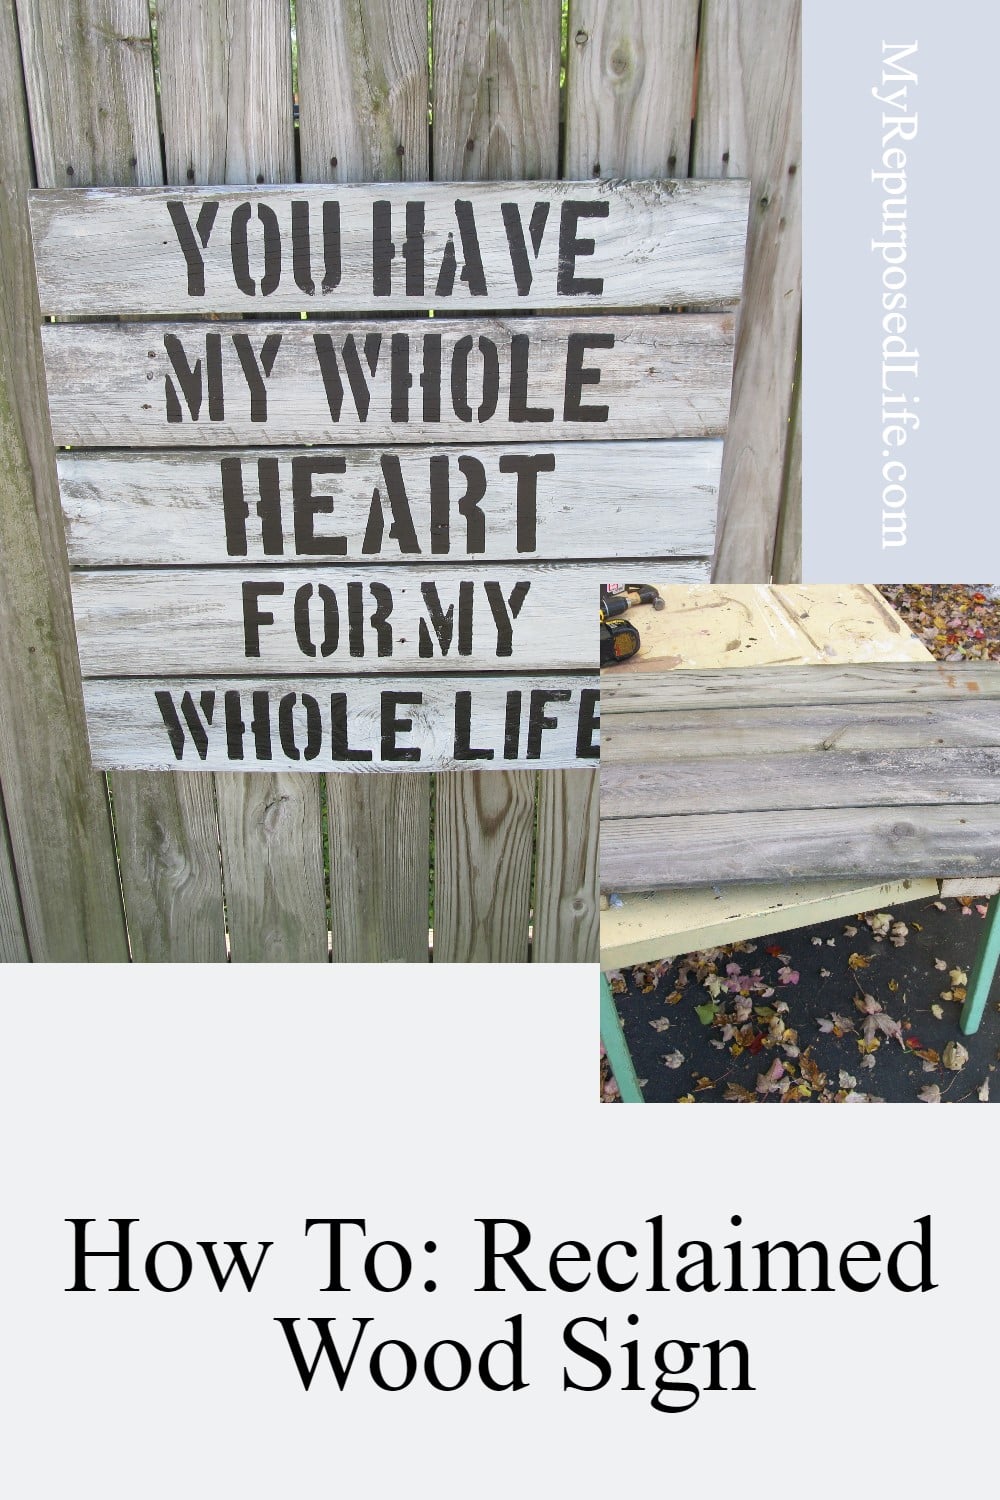 Learn how to make a unique and rustic reclaimed wooden sign with these easy steps! Follow this step by step guide and create a one-of-a-kind sign for your home. #MyRepurposedLife #MyWholeHeart #diy #sign via @repurposedlife